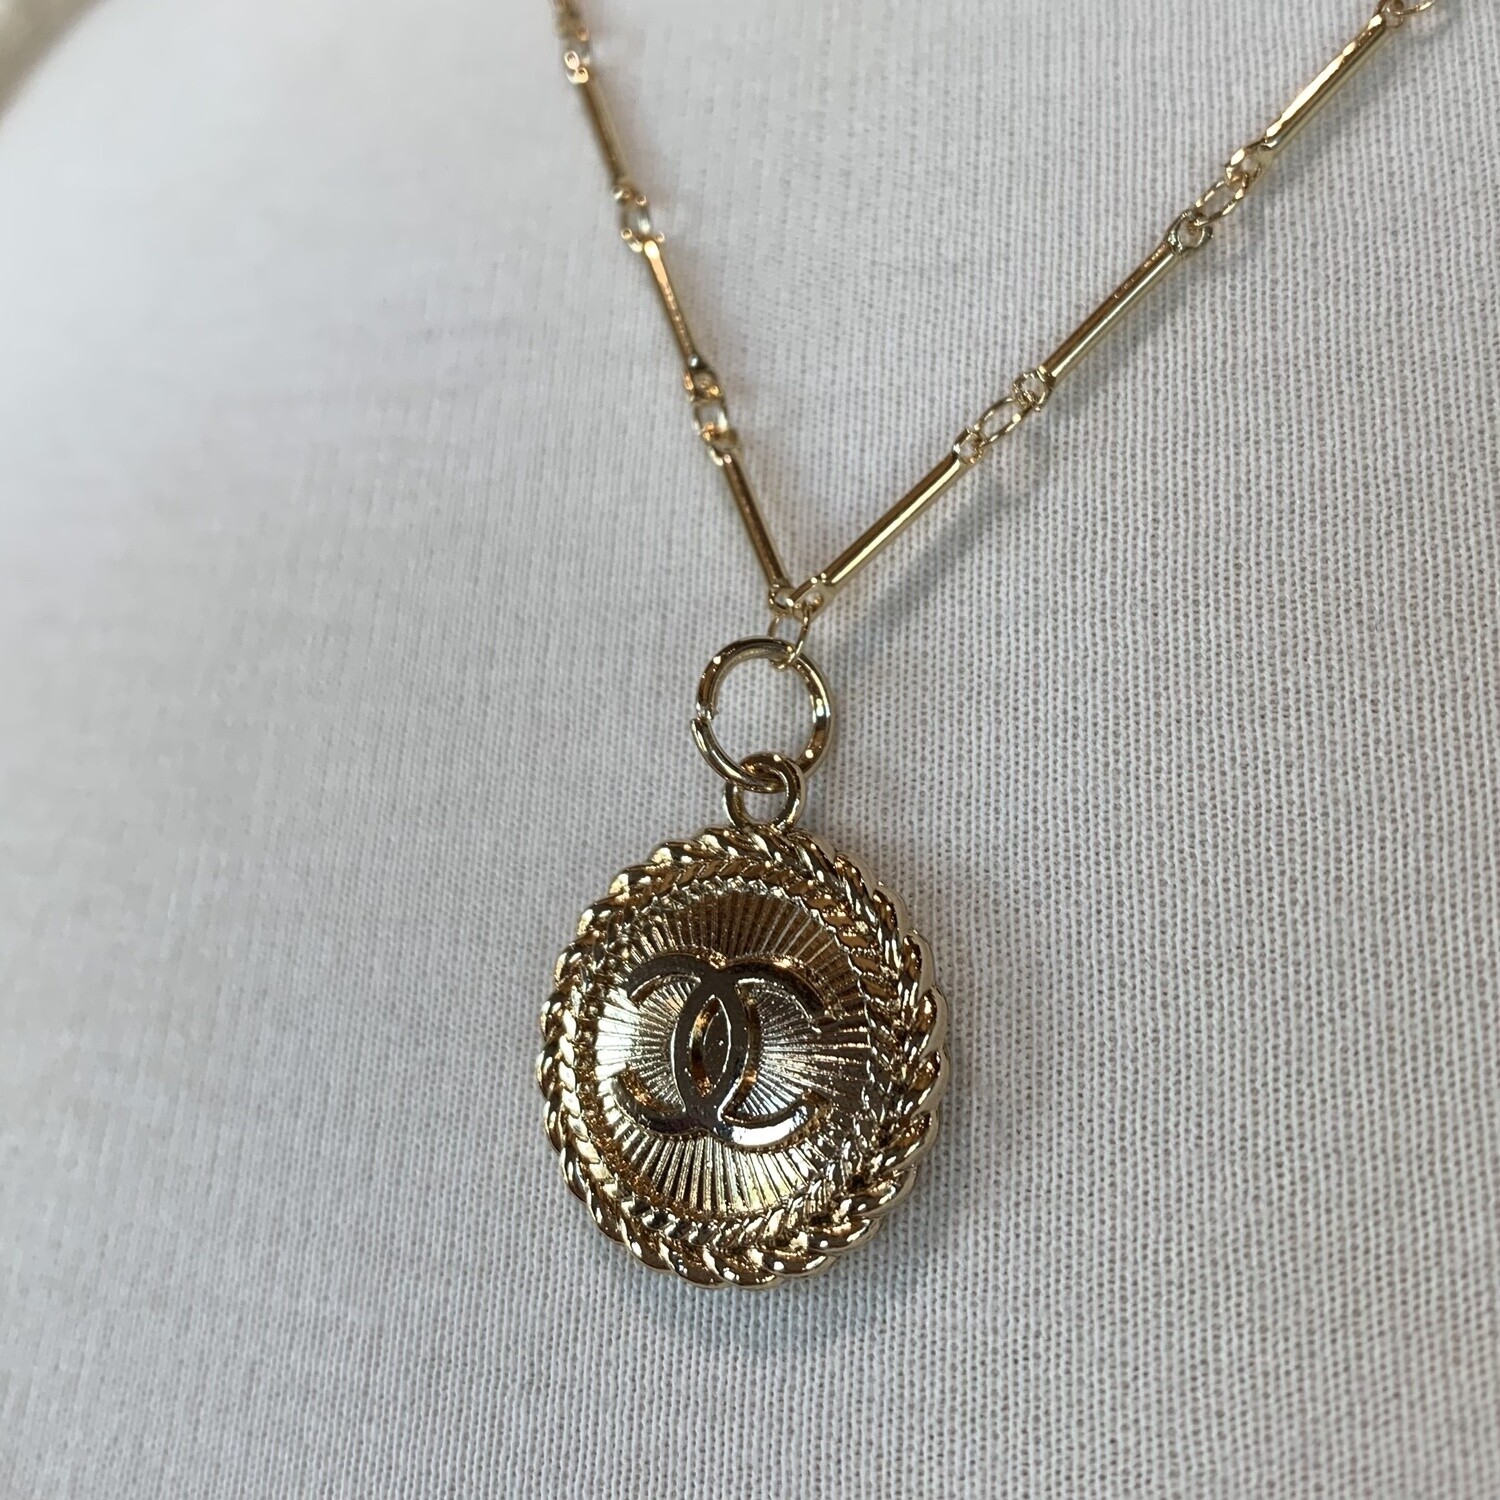 Gold Chanel Button Necklace